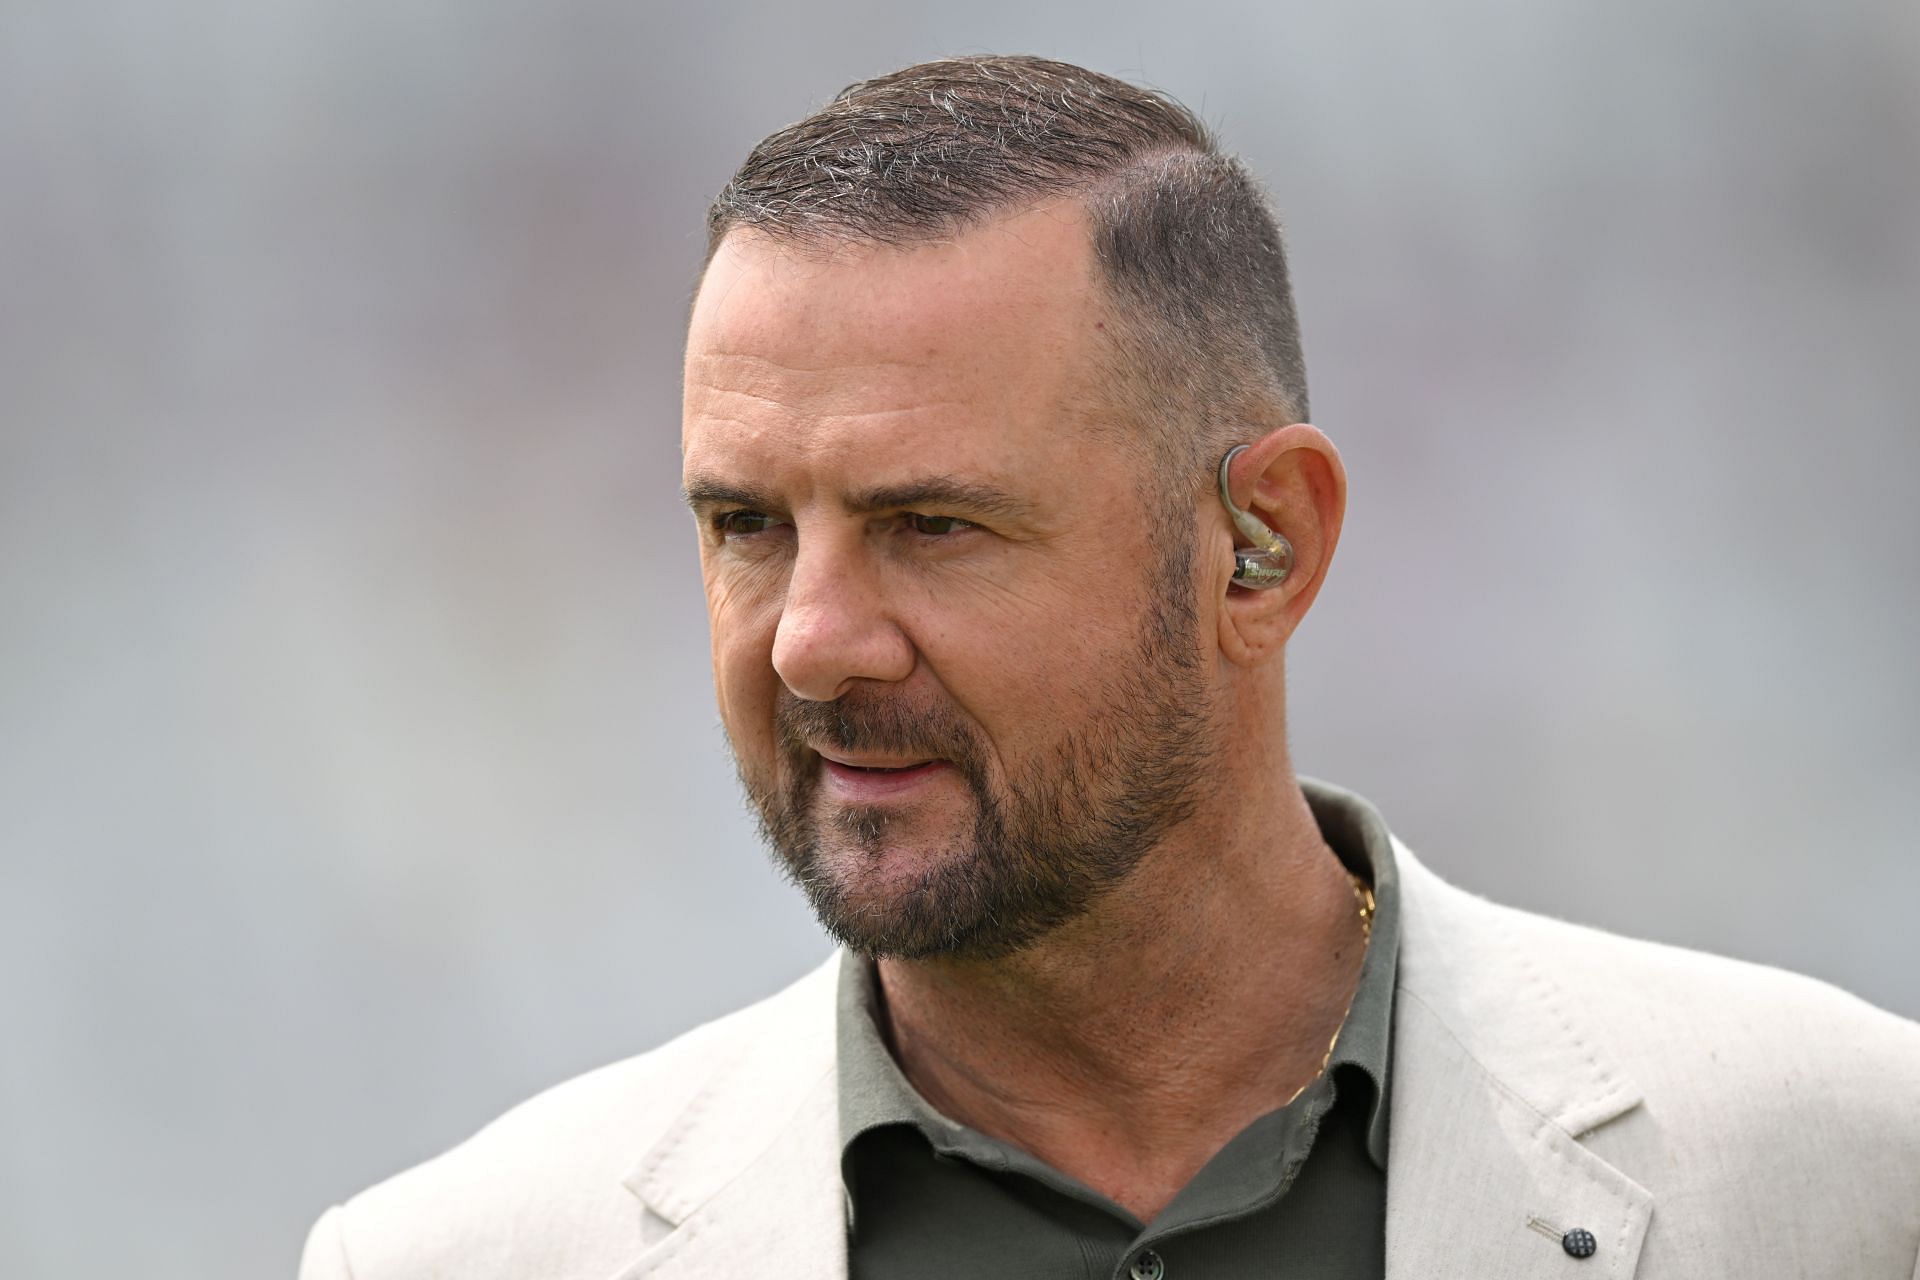 Former Kiwi cricketer-turned-commentator Simon Doull. (Pic: Getty Images)